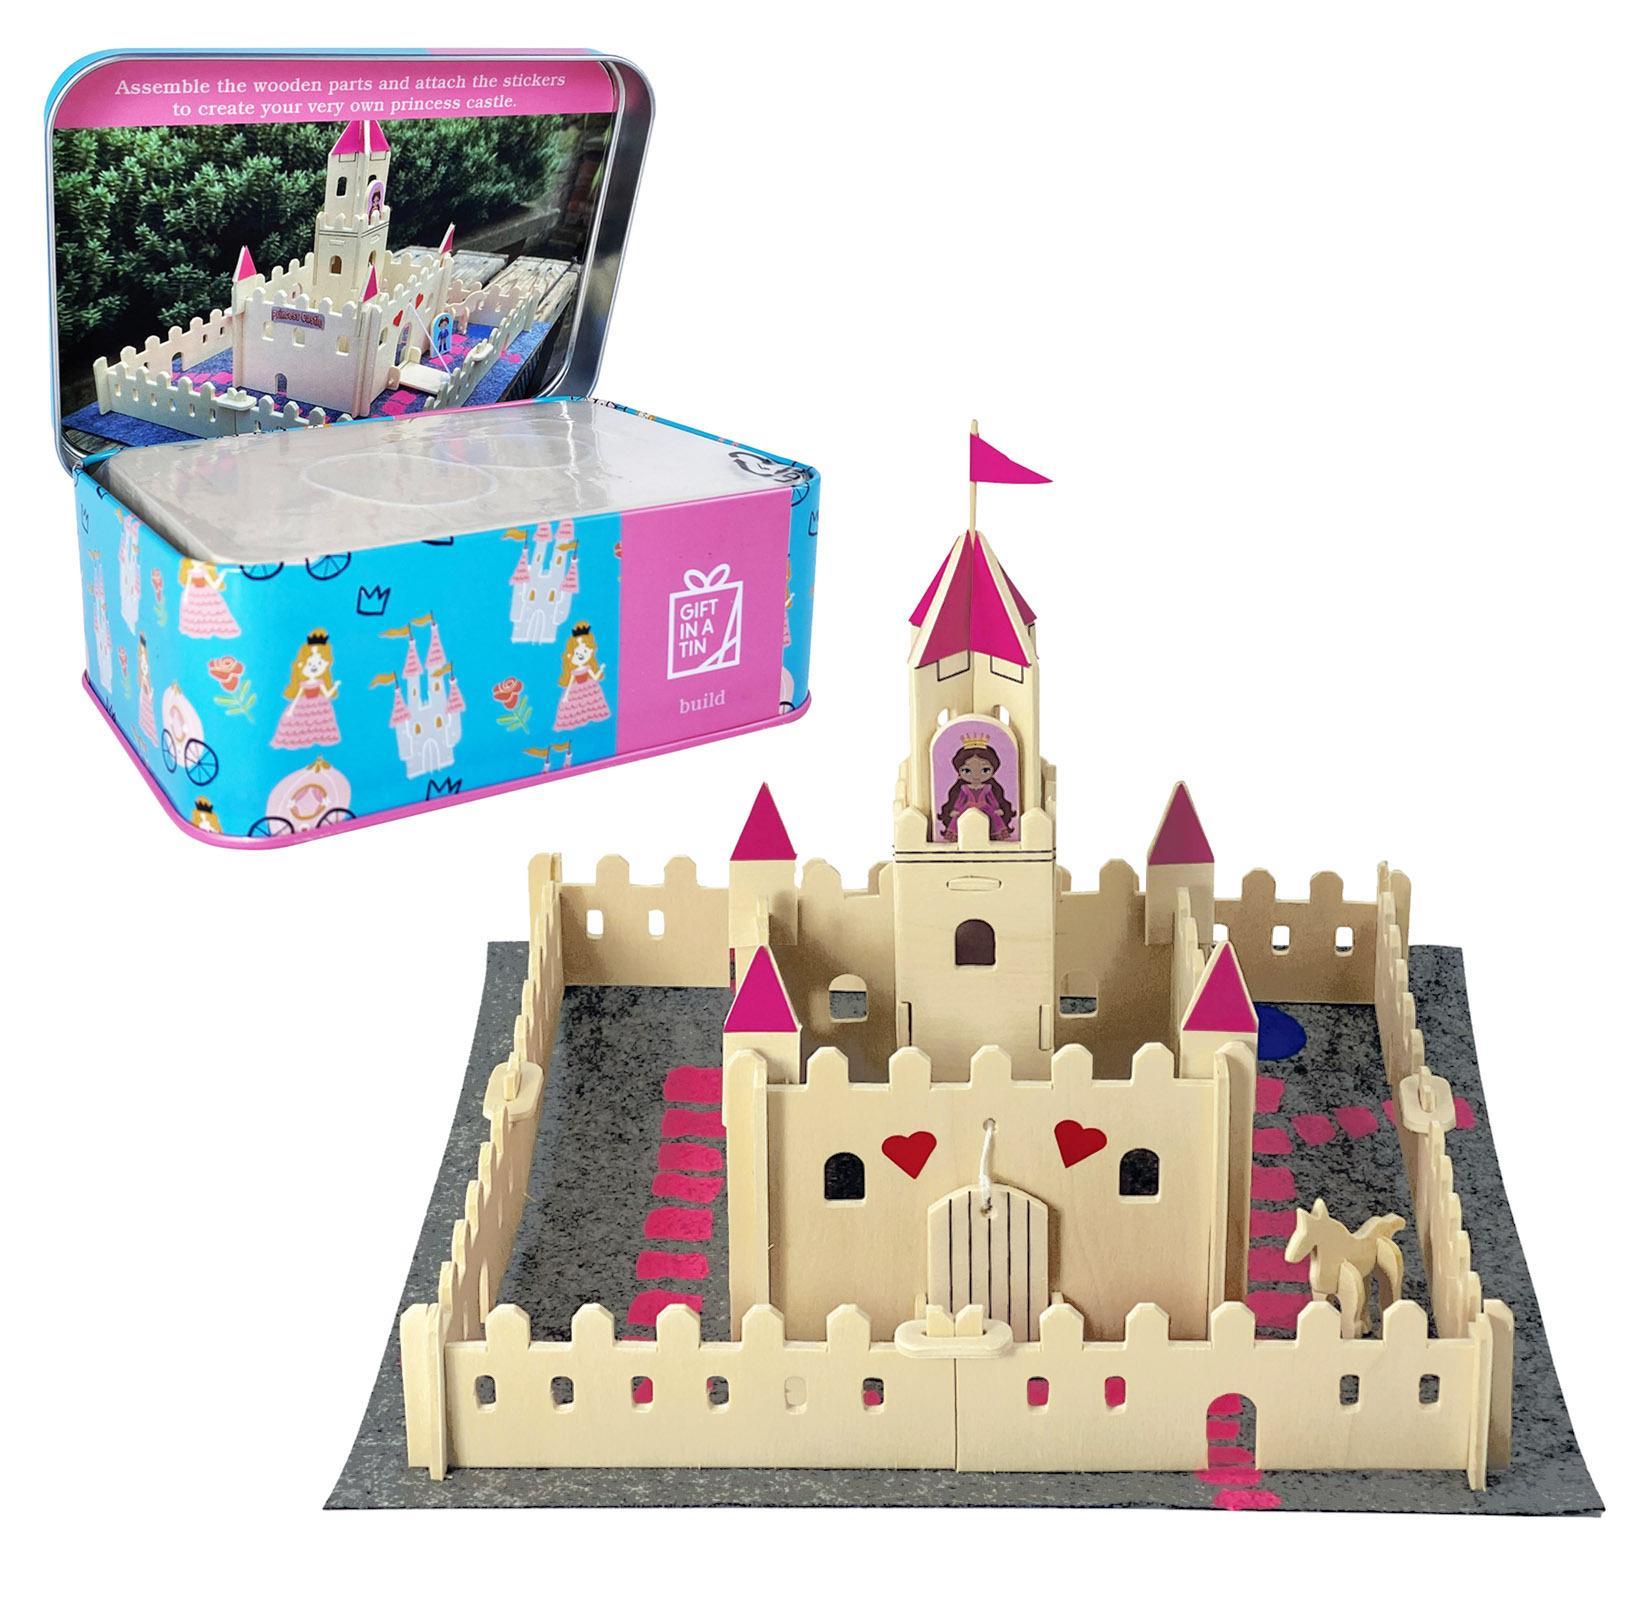 Magical Princess Castle In A Tin Apples To Pears Wooden Model Kit